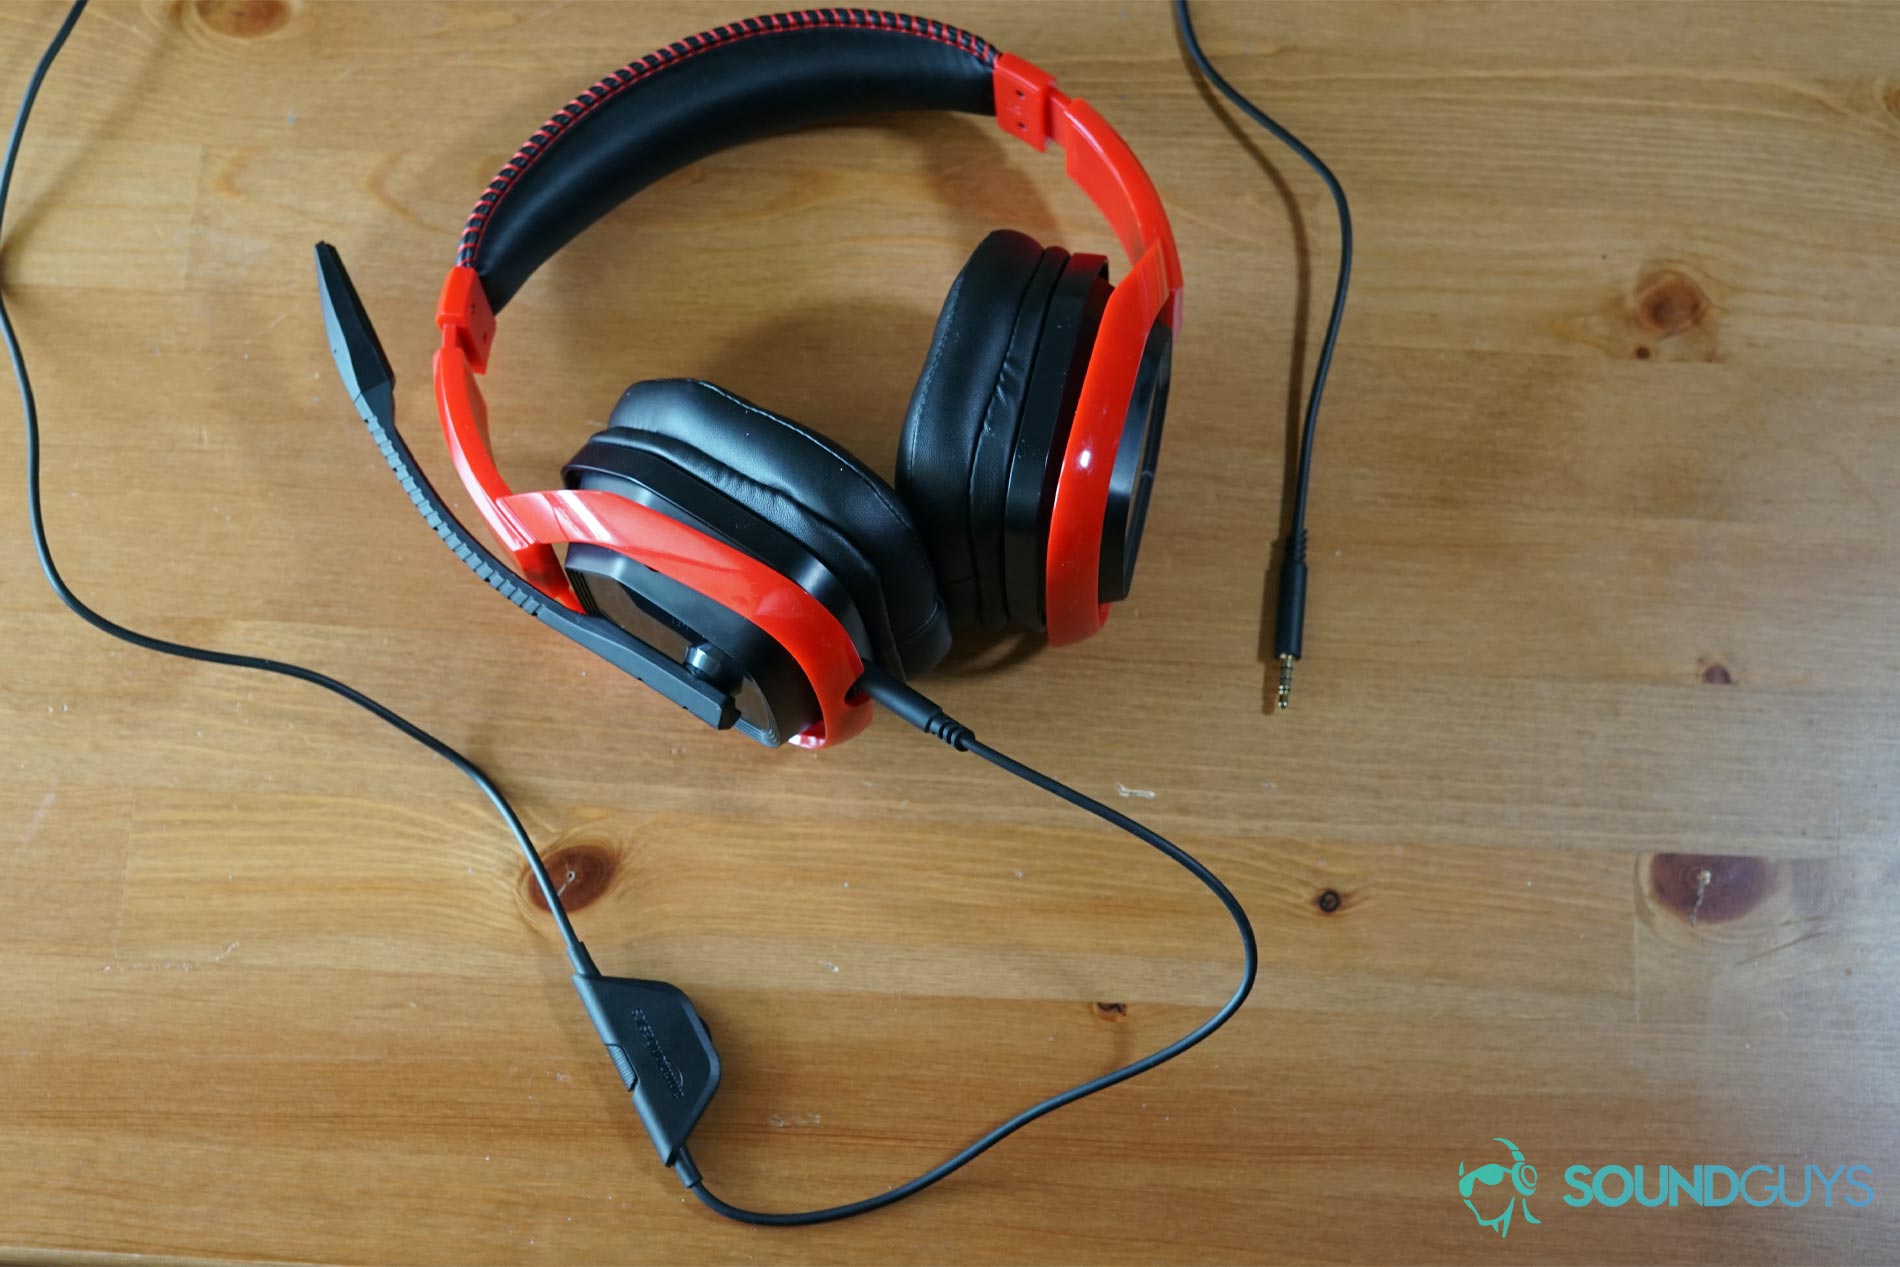 The AmazonBasics Pro Gaming Headset lying flat on a wooden table,